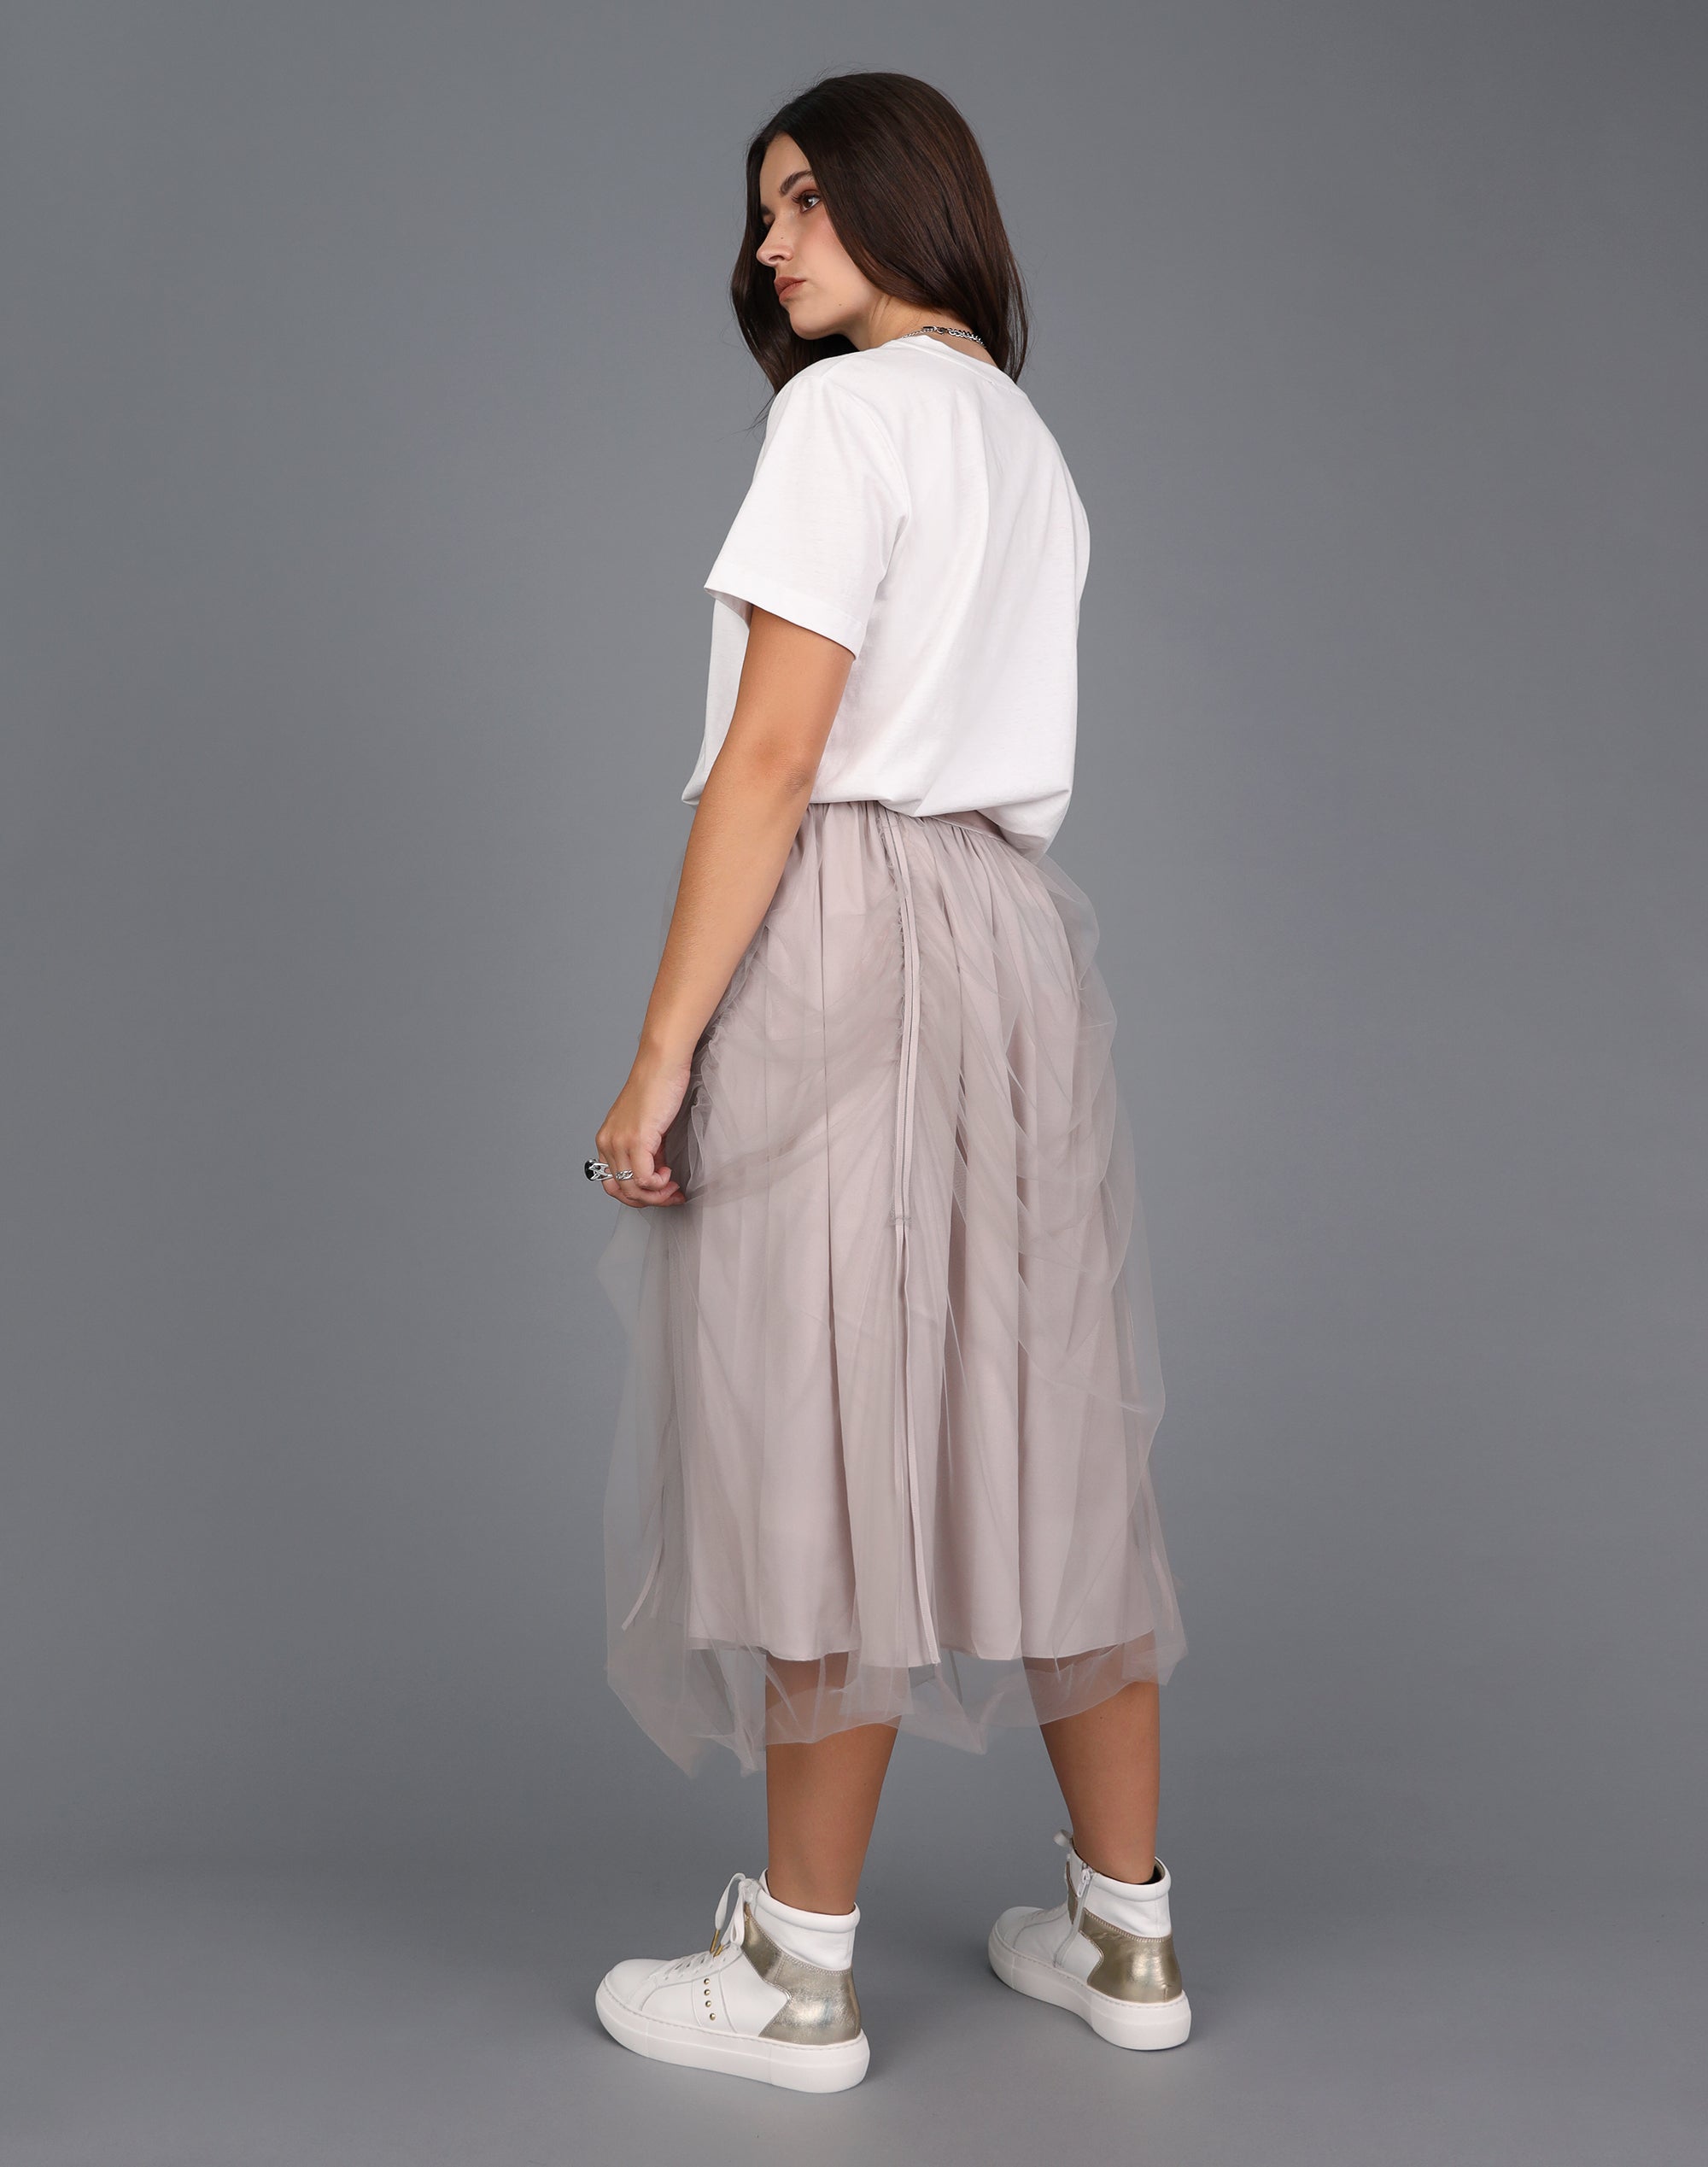 Ruched Mesh Skirt